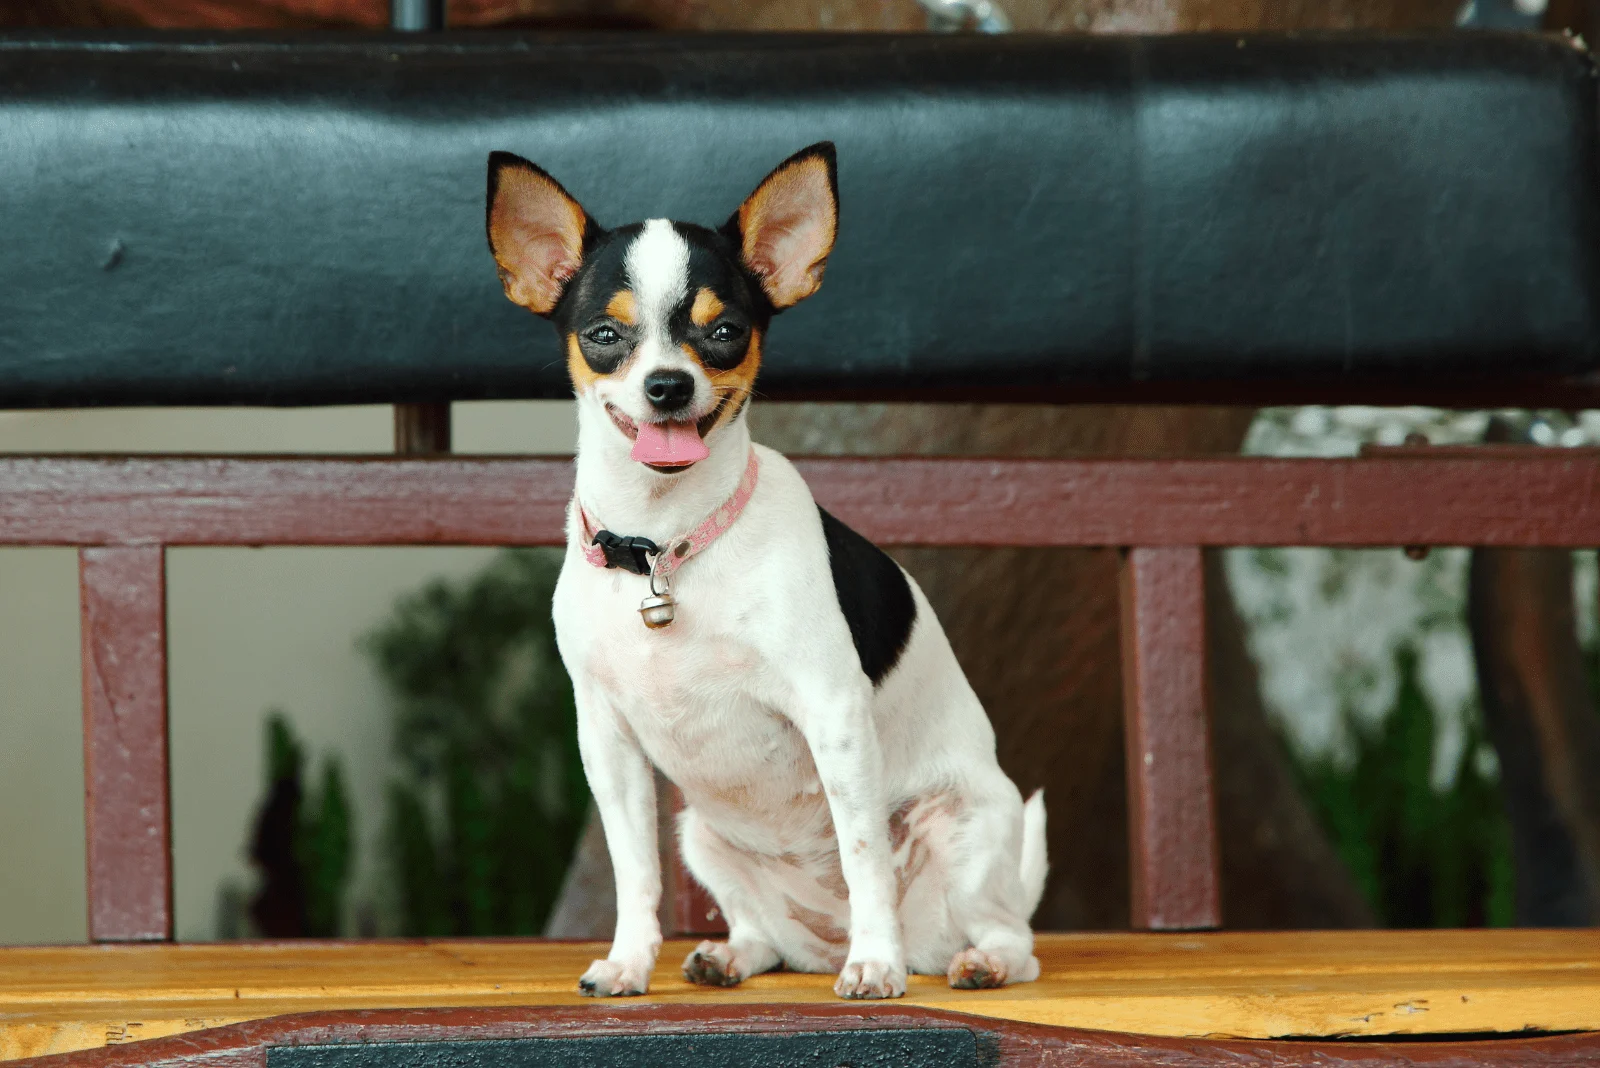 Rat Terrier sits on a wooden base and looks ahead